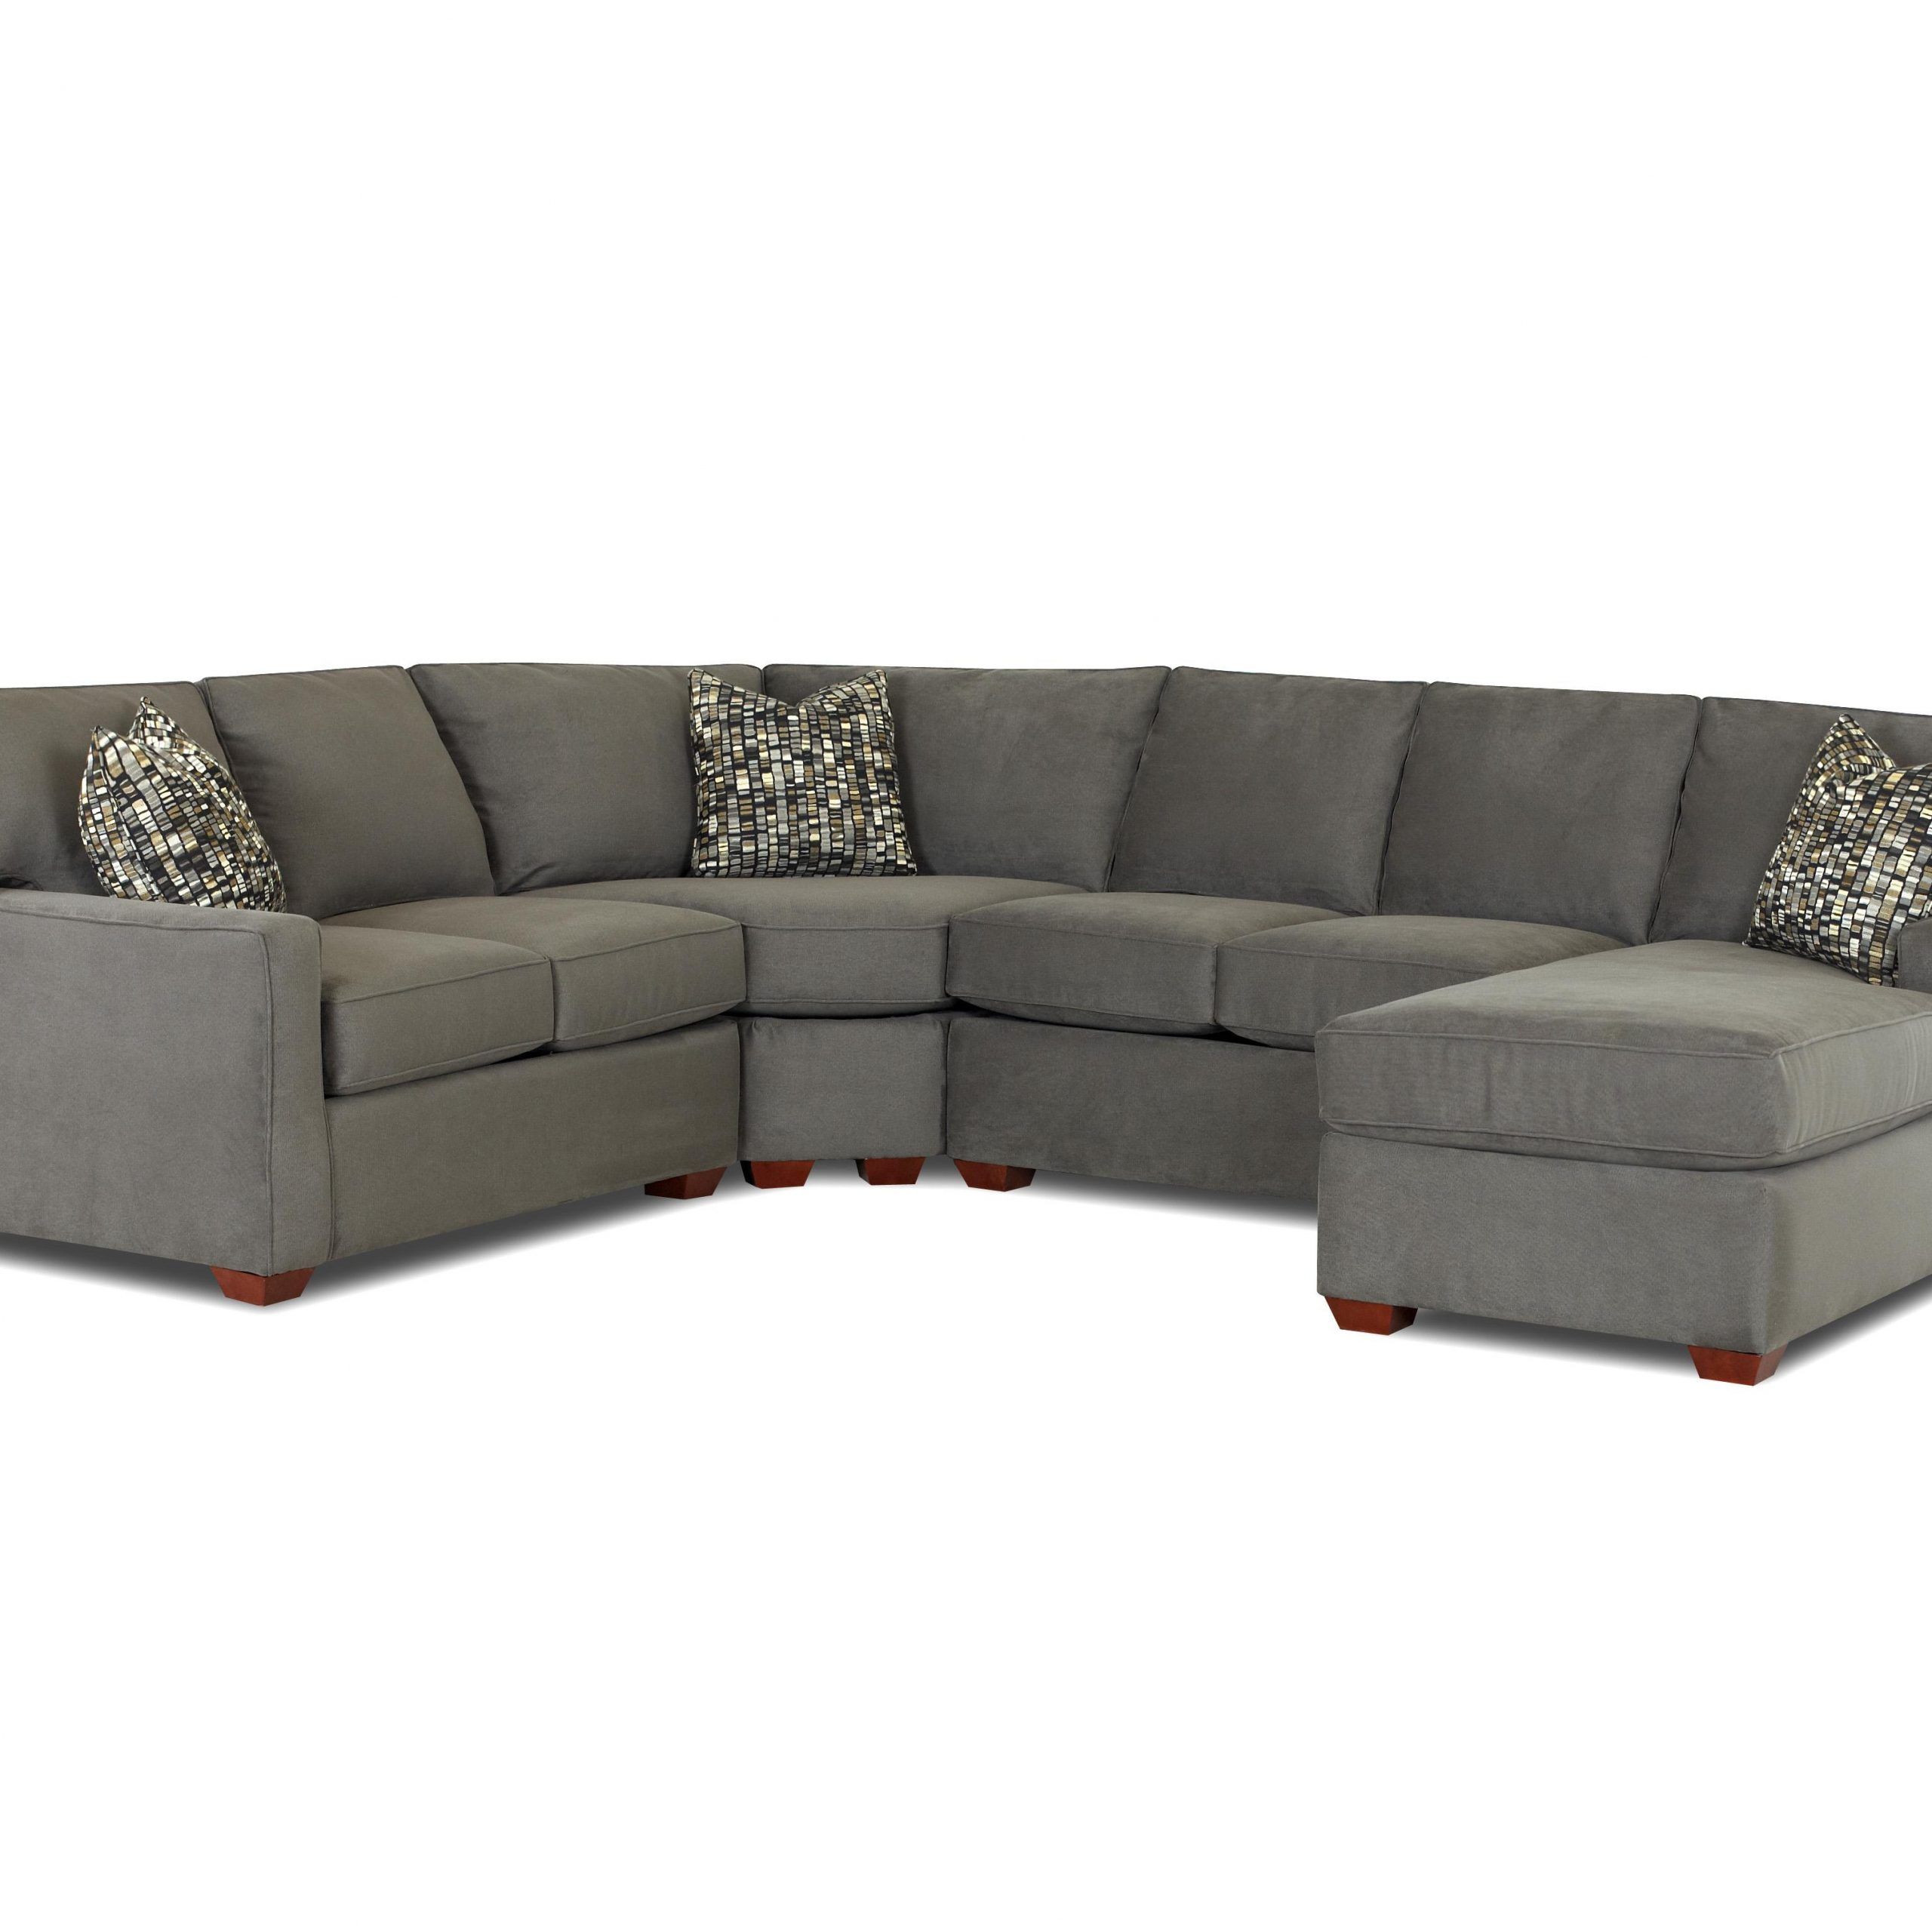 Hannah Left Sectional Sofas Throughout Most Recent Contemporary L Shaped Sectional Sofa With Left Arm Facing (View 15 of 25)